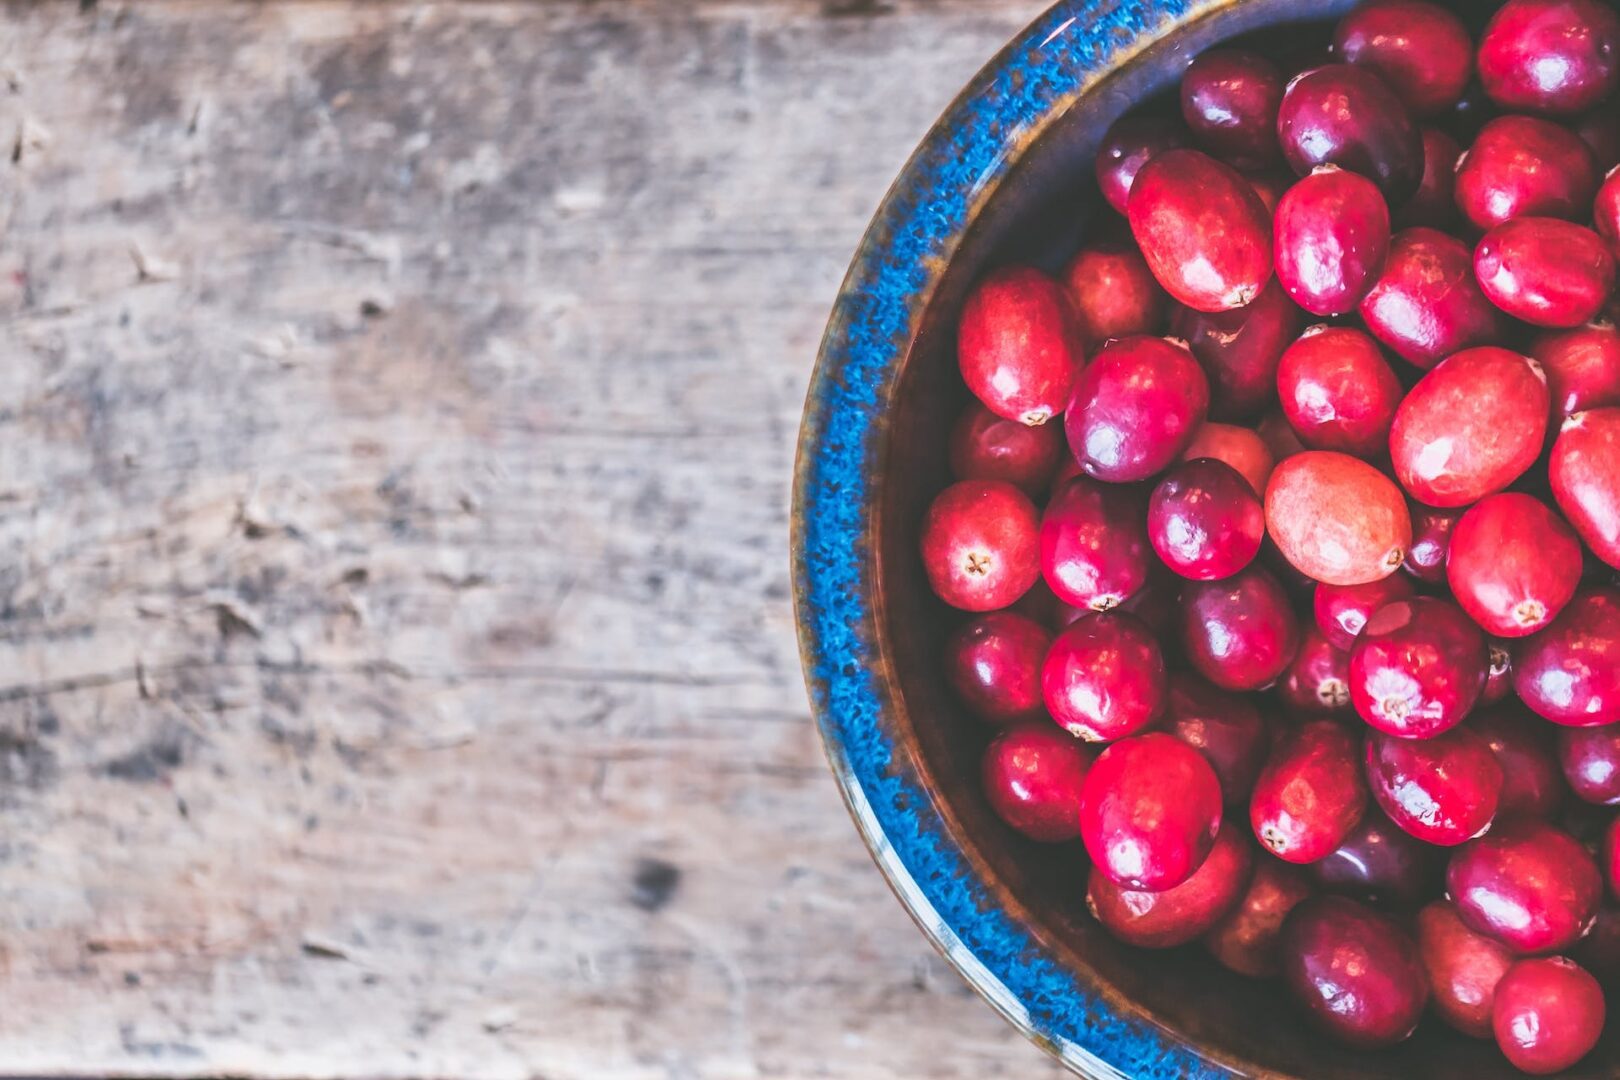 Cranberries in a bowl on a wooden table.